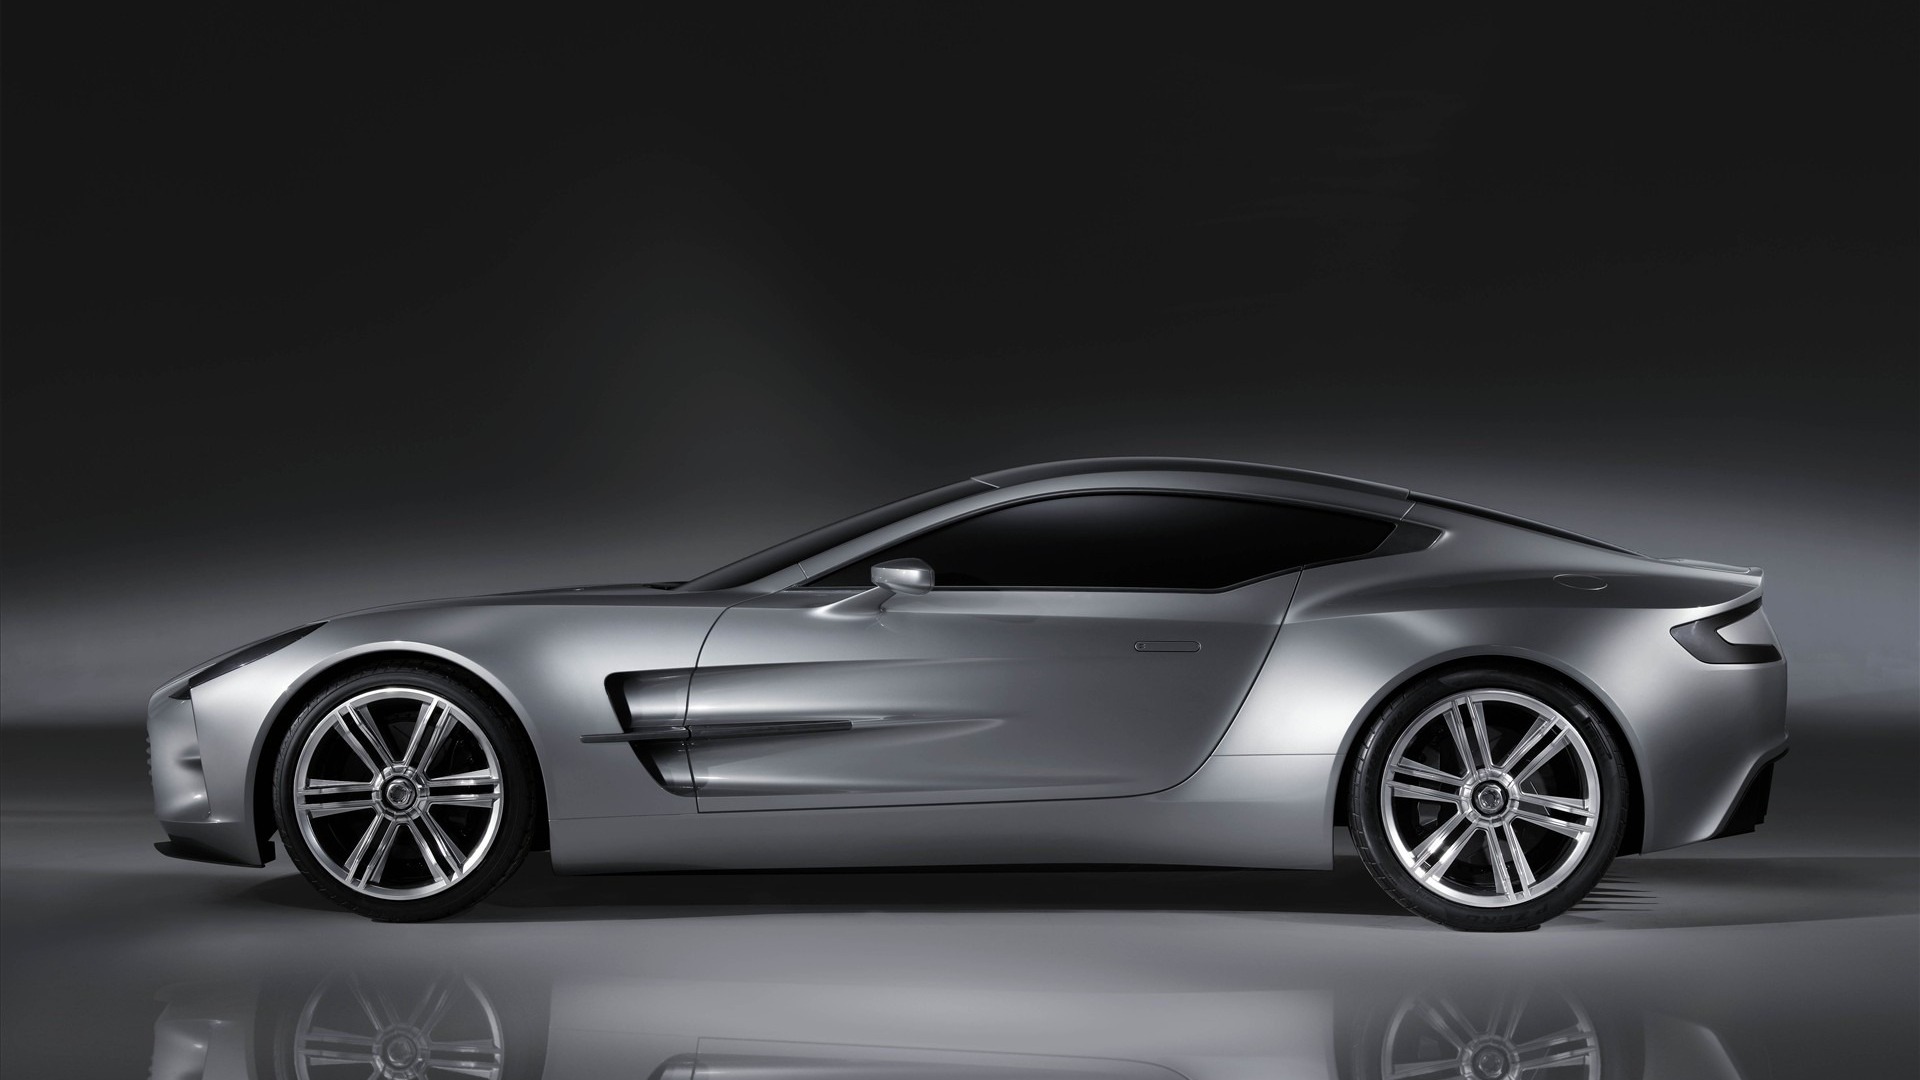 Auto / Luxury Cars - Aston Martin One 77 , HD Wallpaper & Backgrounds